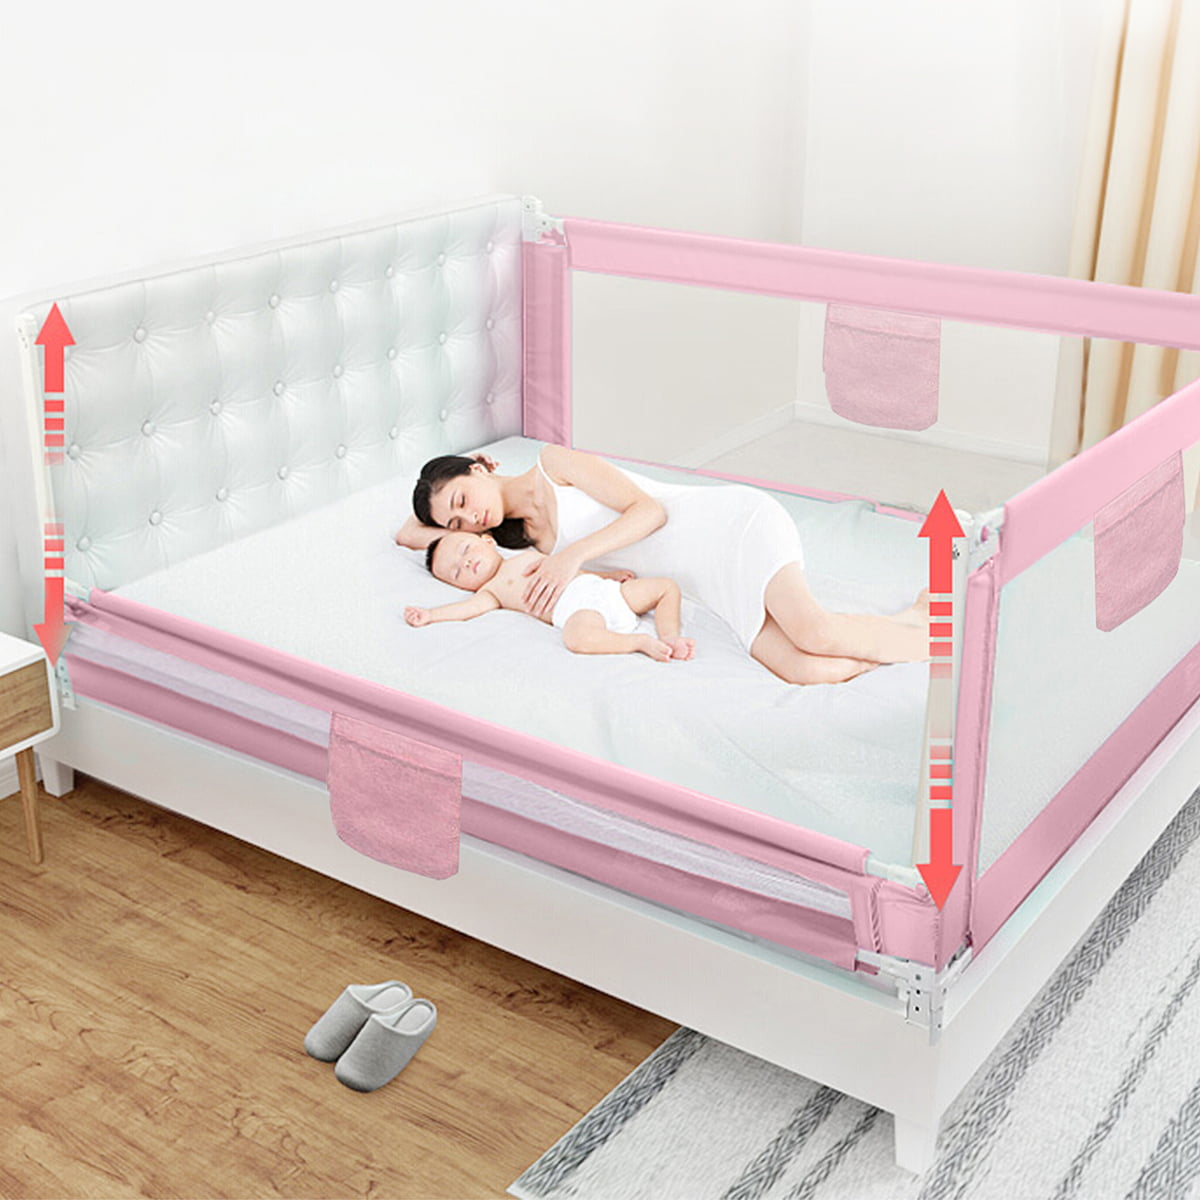 1Pcs Bed Rails for Toddlers 